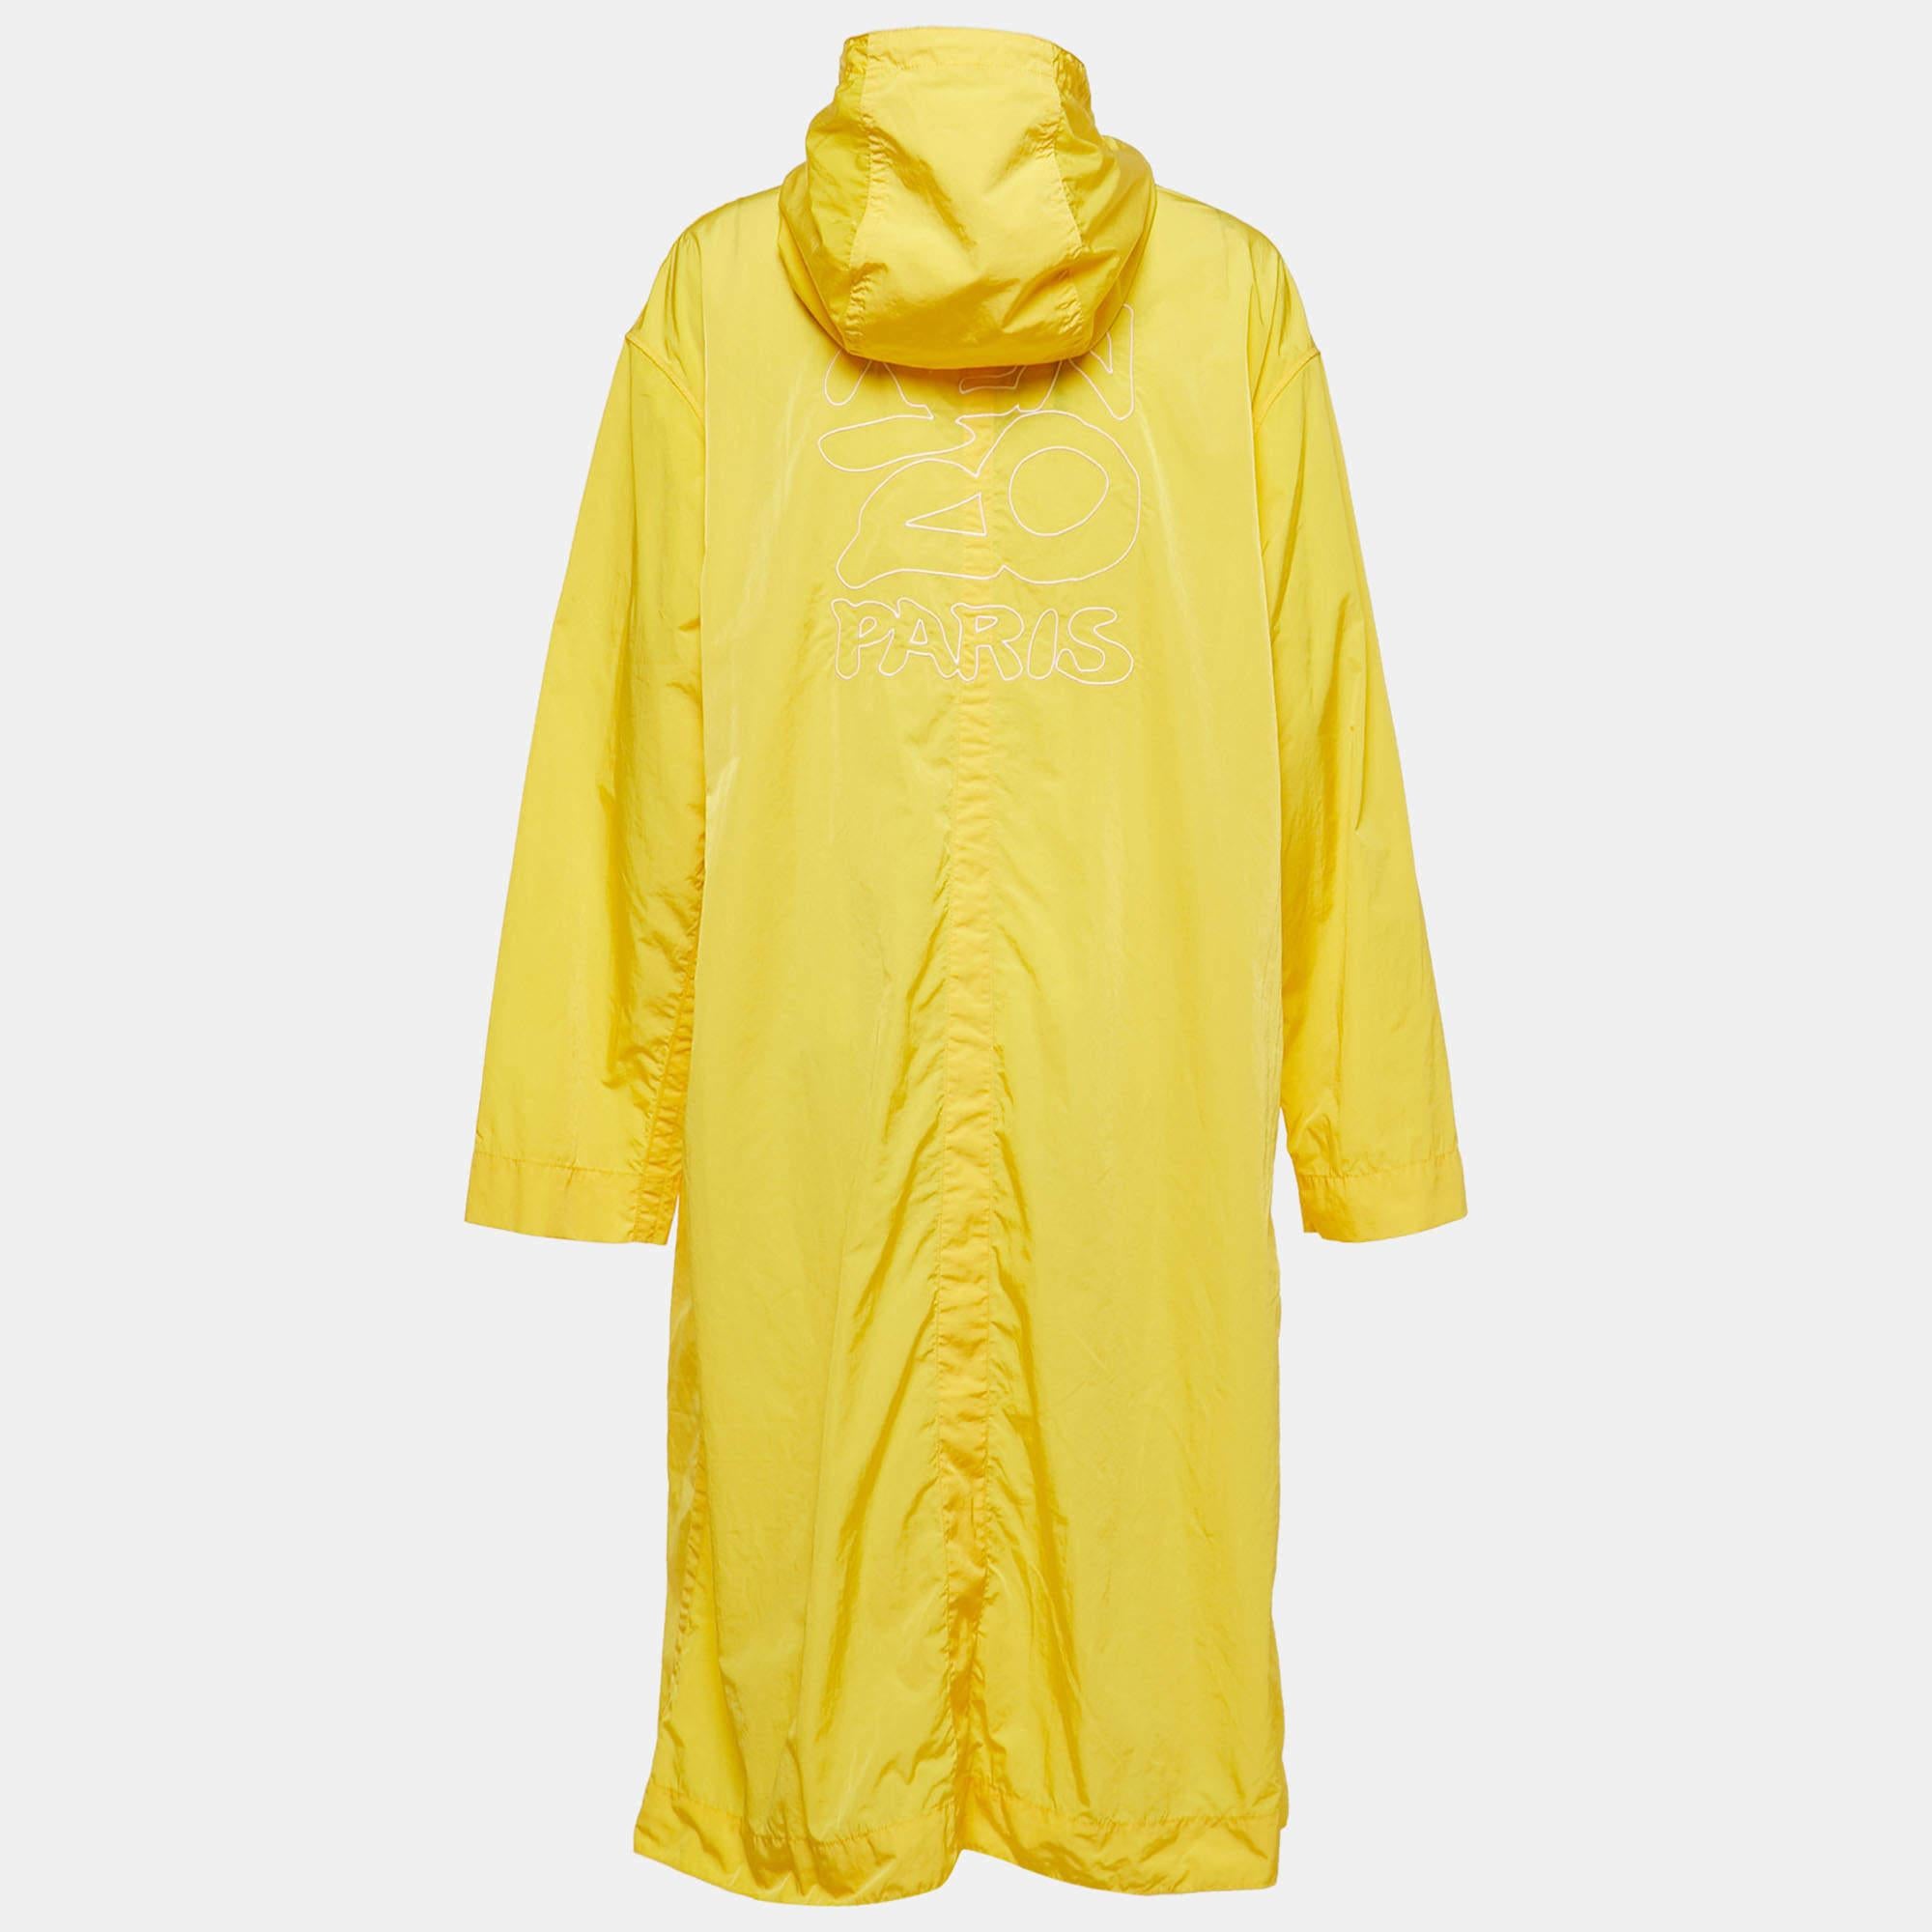 The Kenzo Raincoat is a stylish and functional outerwear piece. Made from durable nylon, this raincoat features a bright yellow color that adds a pop of color to rainy days. It has a button front closure for easy wear and a hood for added protection